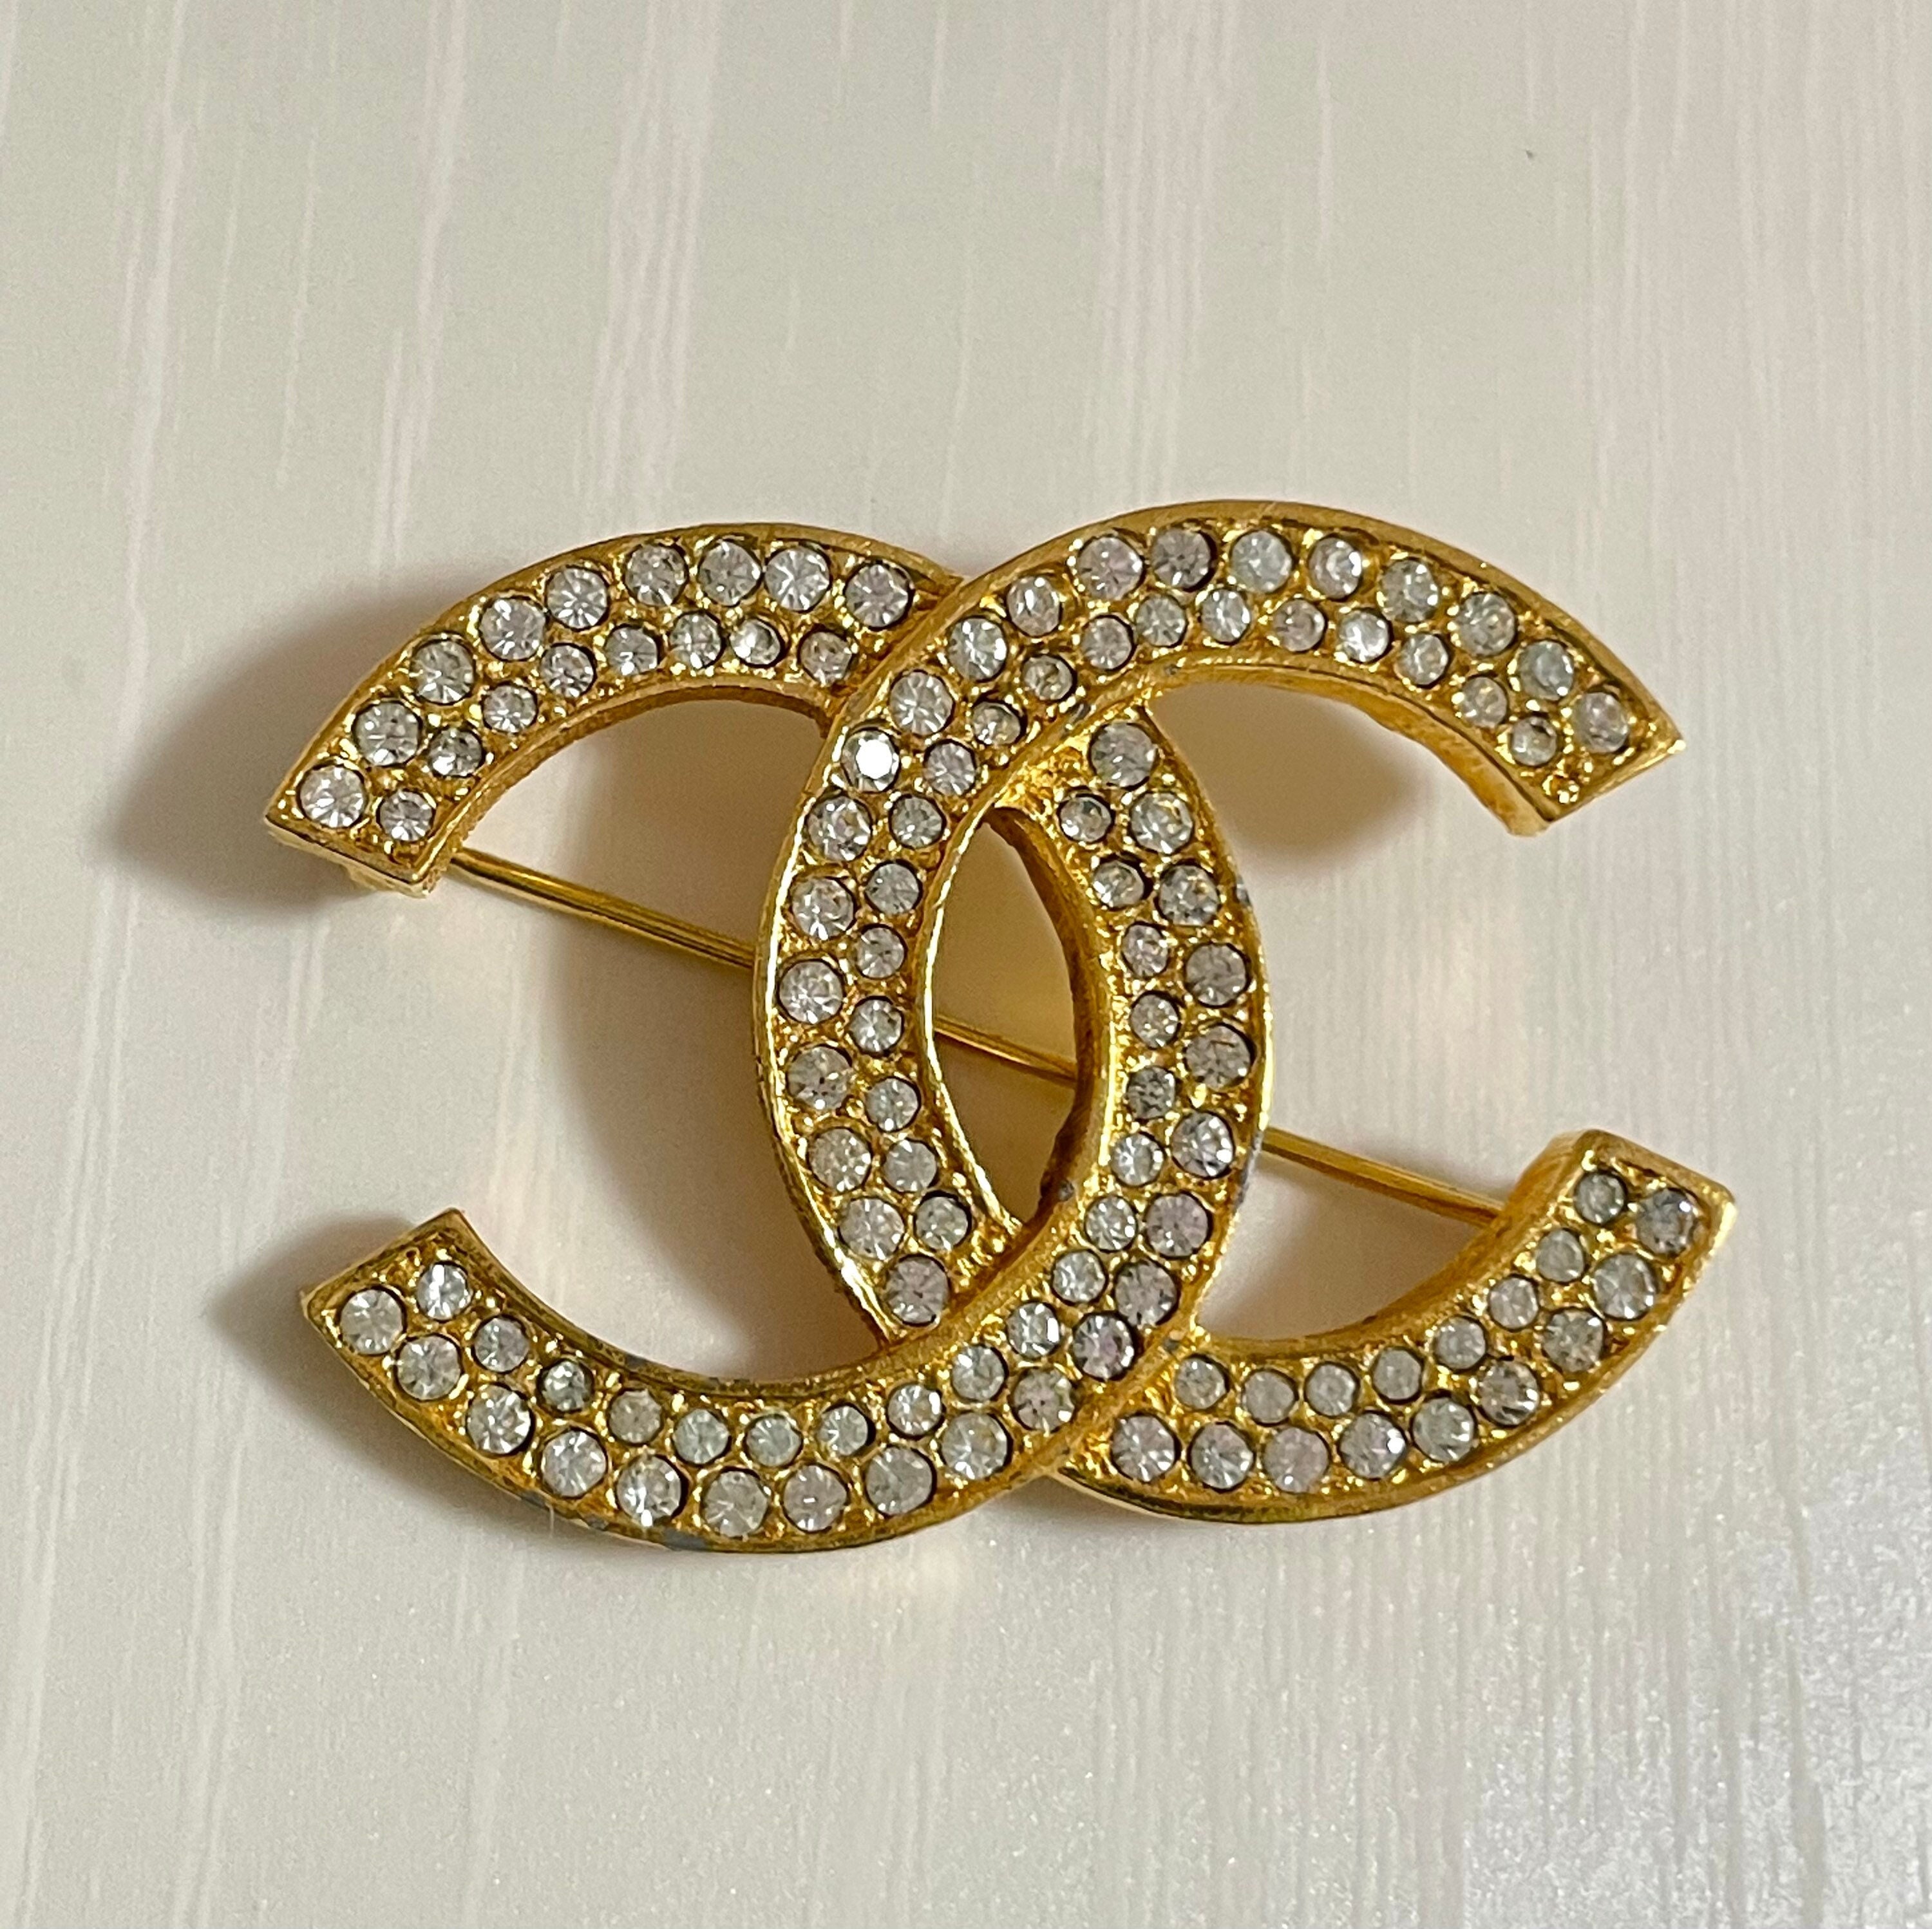 Buy Coco Chanel Brooch Online In India -  India